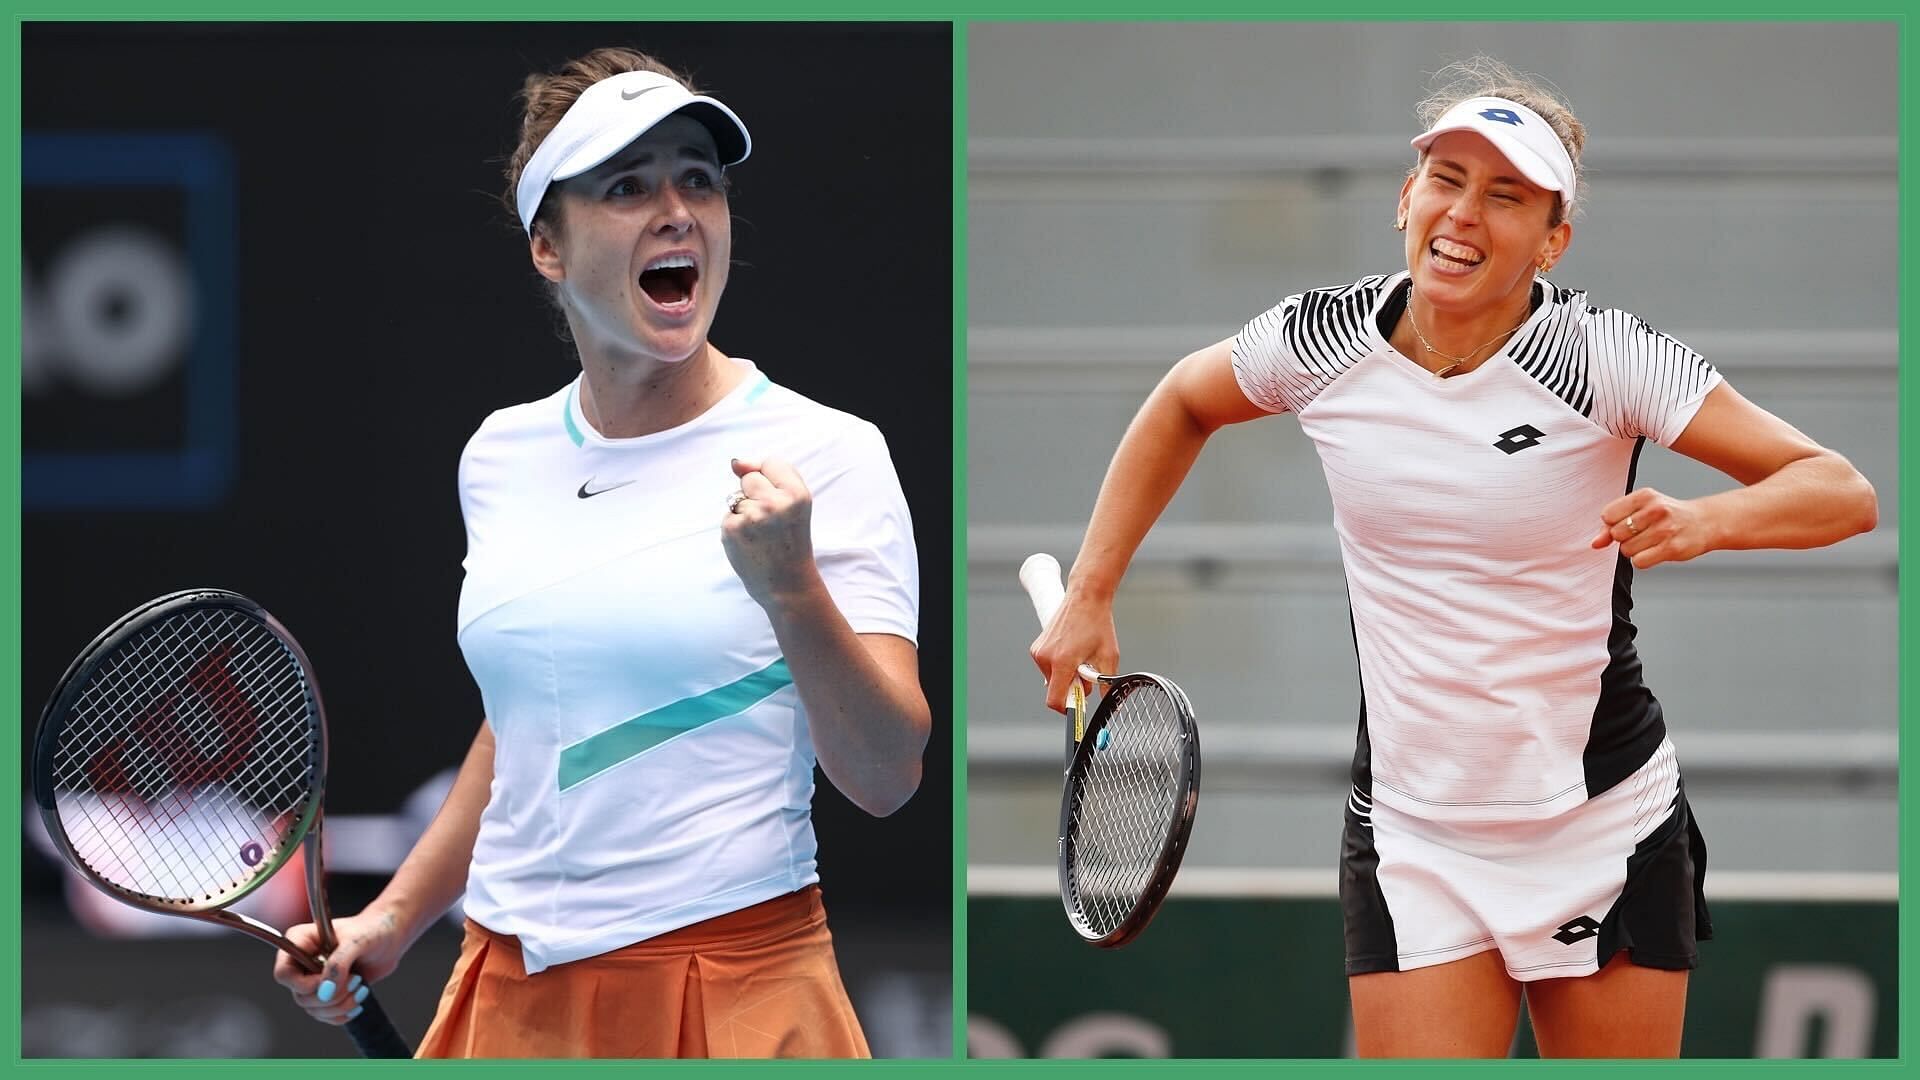 Elina Svitolina vs Elise Mertens is one of the second-round matches at the 2023 Wimbledon.